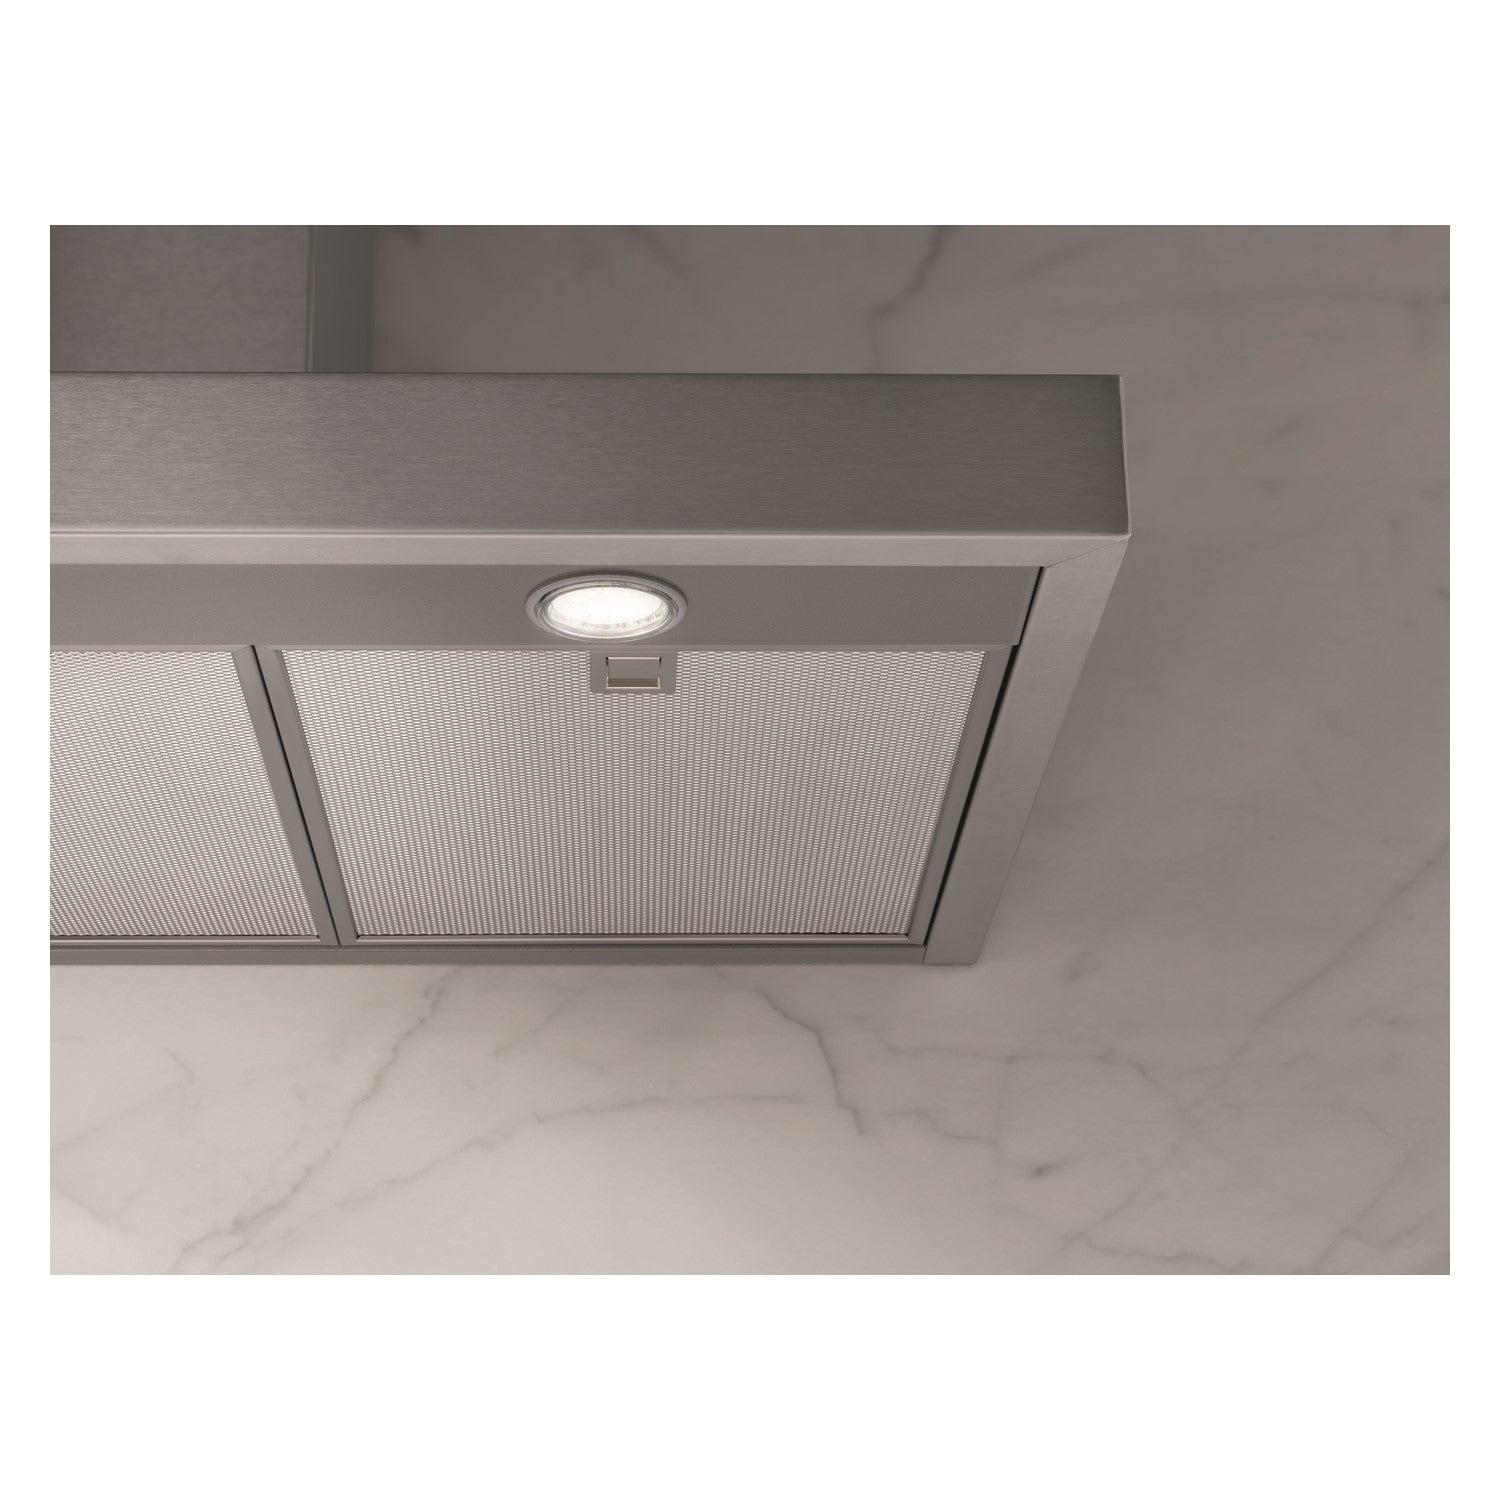 Miele 90cm Wall Mounted Cooker Hood DA PUR 98 W Stainless Steel Finish